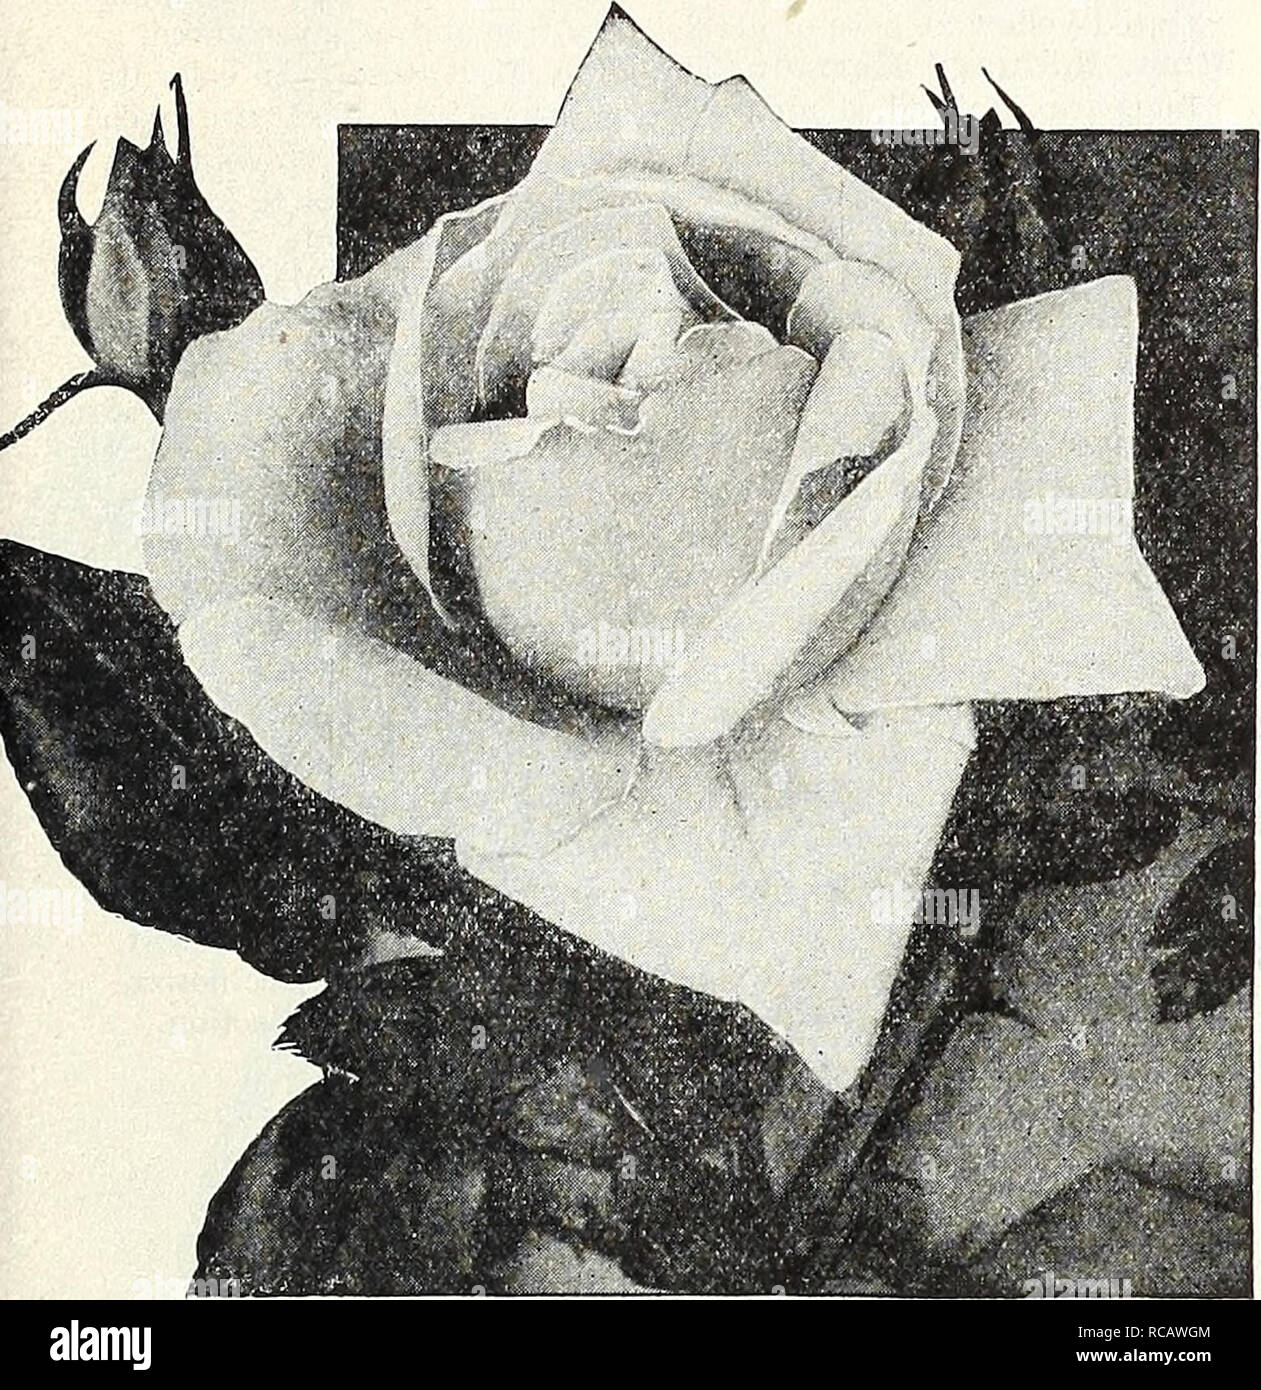 . Dreer's autumn catalogue 1931. Bulbs (Plants) Catalogs; Flowers Seeds Catalogs; Gardening Equipment and supplies Catalogs; Nurseries (Horticulture) Catalogs; Vegetables Seeds Catalogs. /flEHTOBEElK SELECT^IO S ES &gt;HILSBEL1&gt;HR% 55 HYBRID-TEA ROSES FOR FALL PLANTING MERITORIOUS RECENT INTRODUCTIONS AND GENERAL LIST OF BEST VARIETIES—Continued Isobel. A lovely single flowered or five petalled variety that is greatly admired. The flowers are 4J inches in diameter of a flushed carmine and orange passing to pink, fragrant and free. John Russell. A handsome brilliant red Rose; a rich deep vel Stock Photo